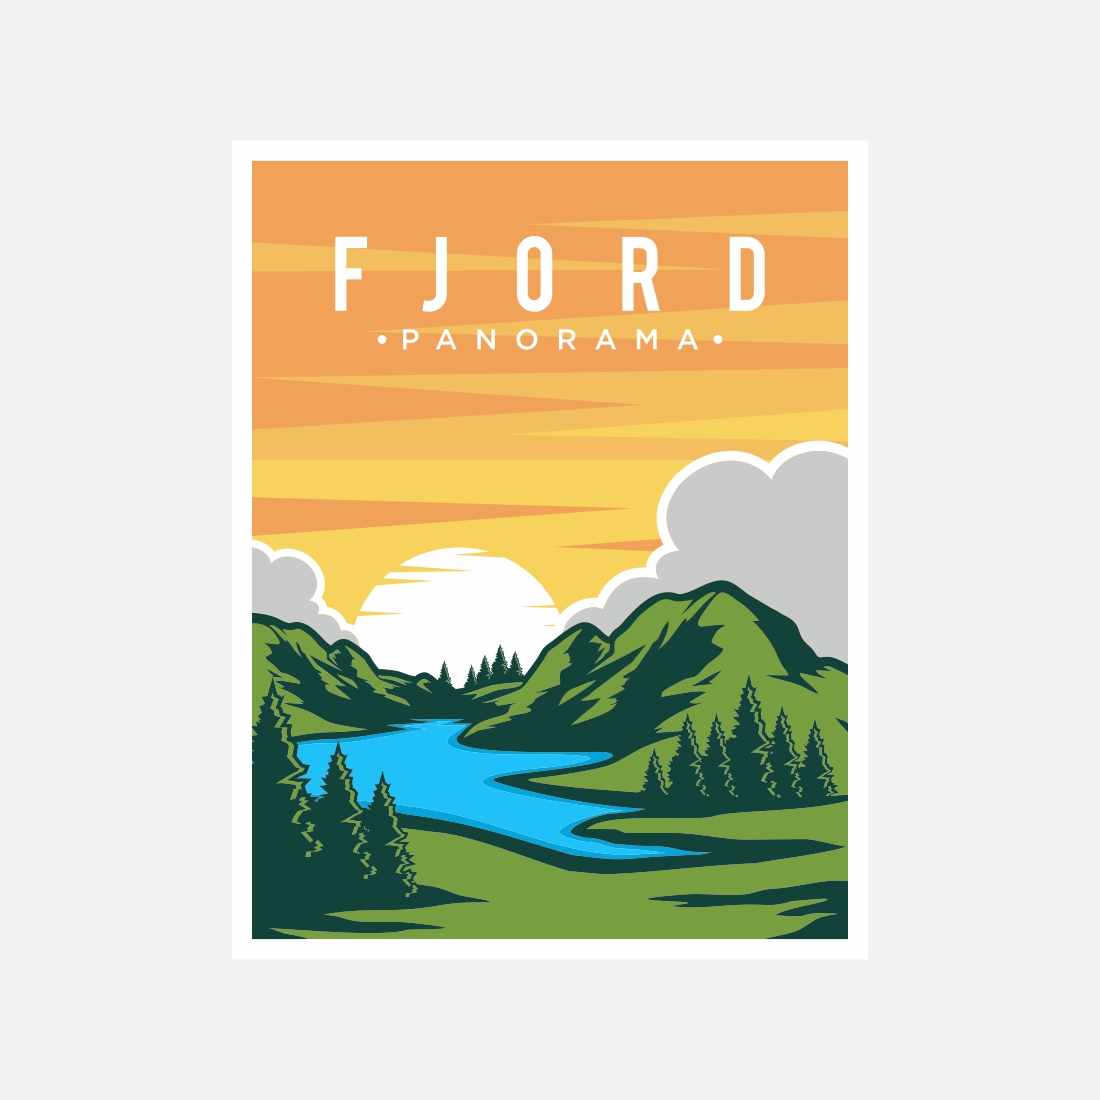 Fjord panorama poster vector illustration desig – Only $7 preview image.